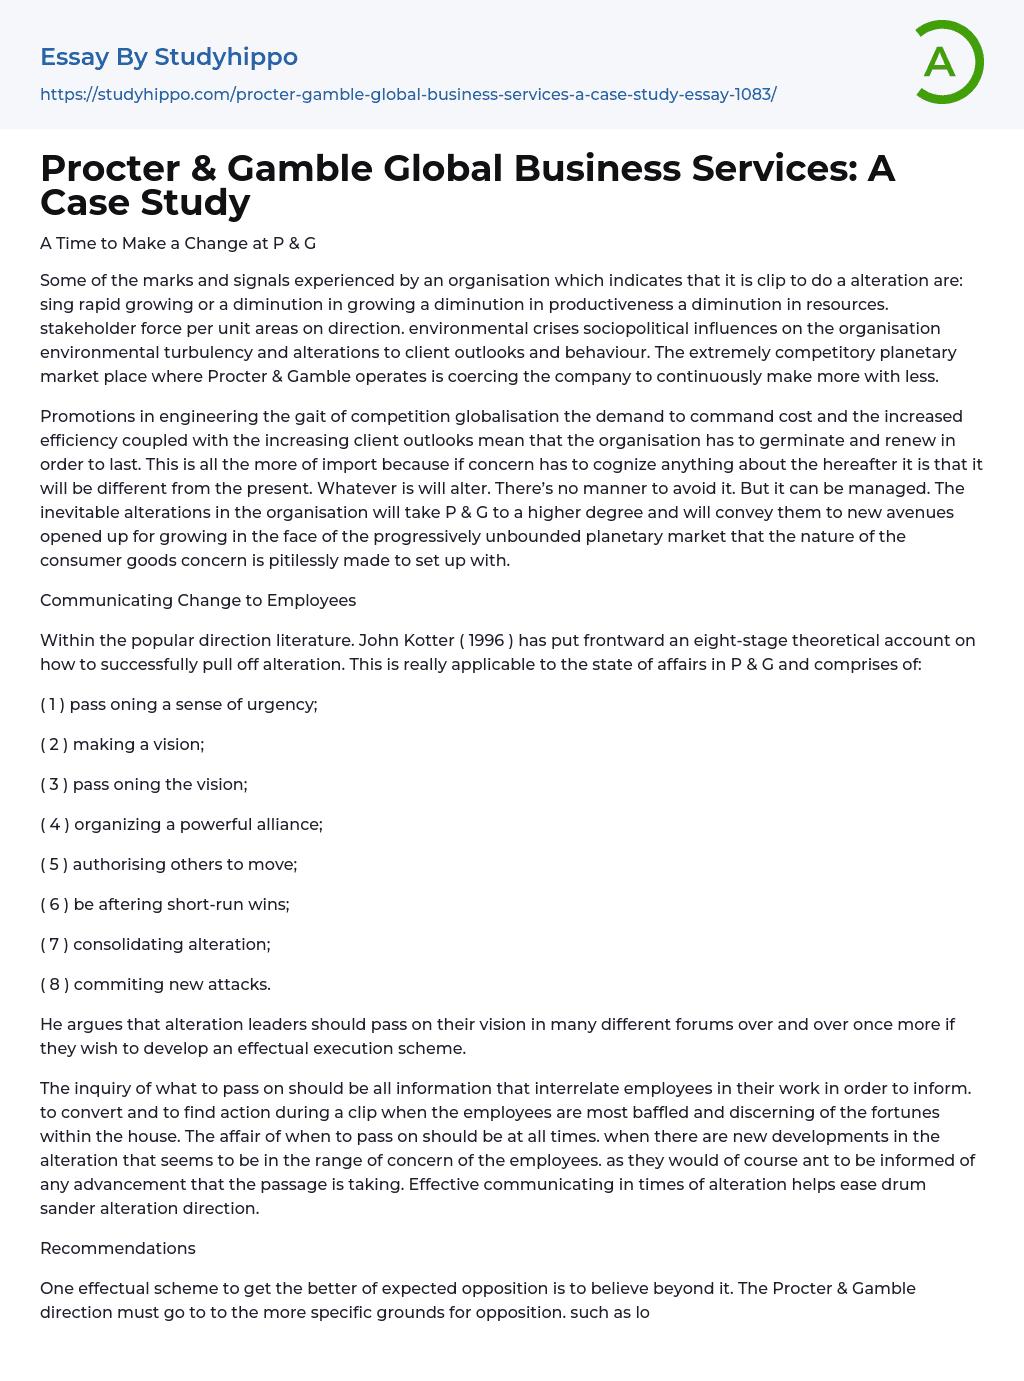 Procter & Gamble Global Business Services: A Case Study Essay Example